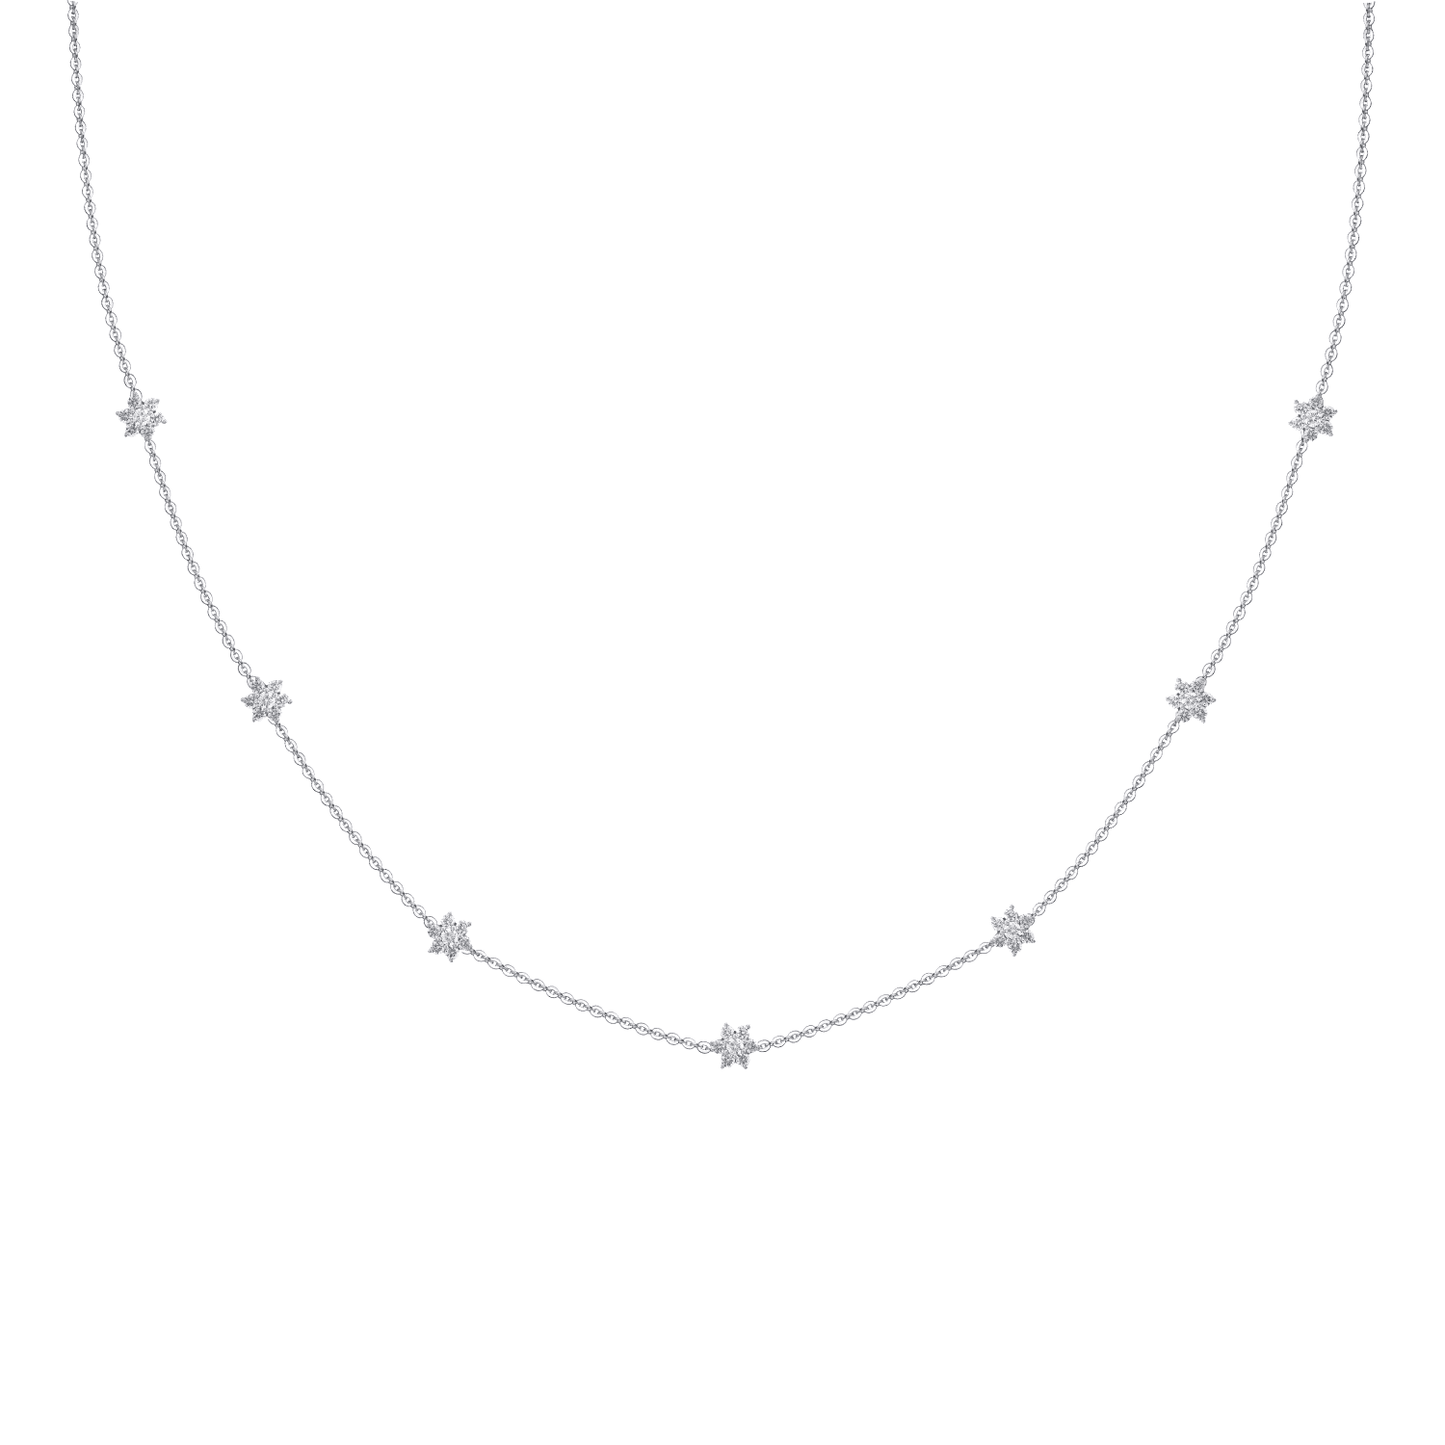 Sparkling Star Constellation Necklace in 92.5 Sterling Silver